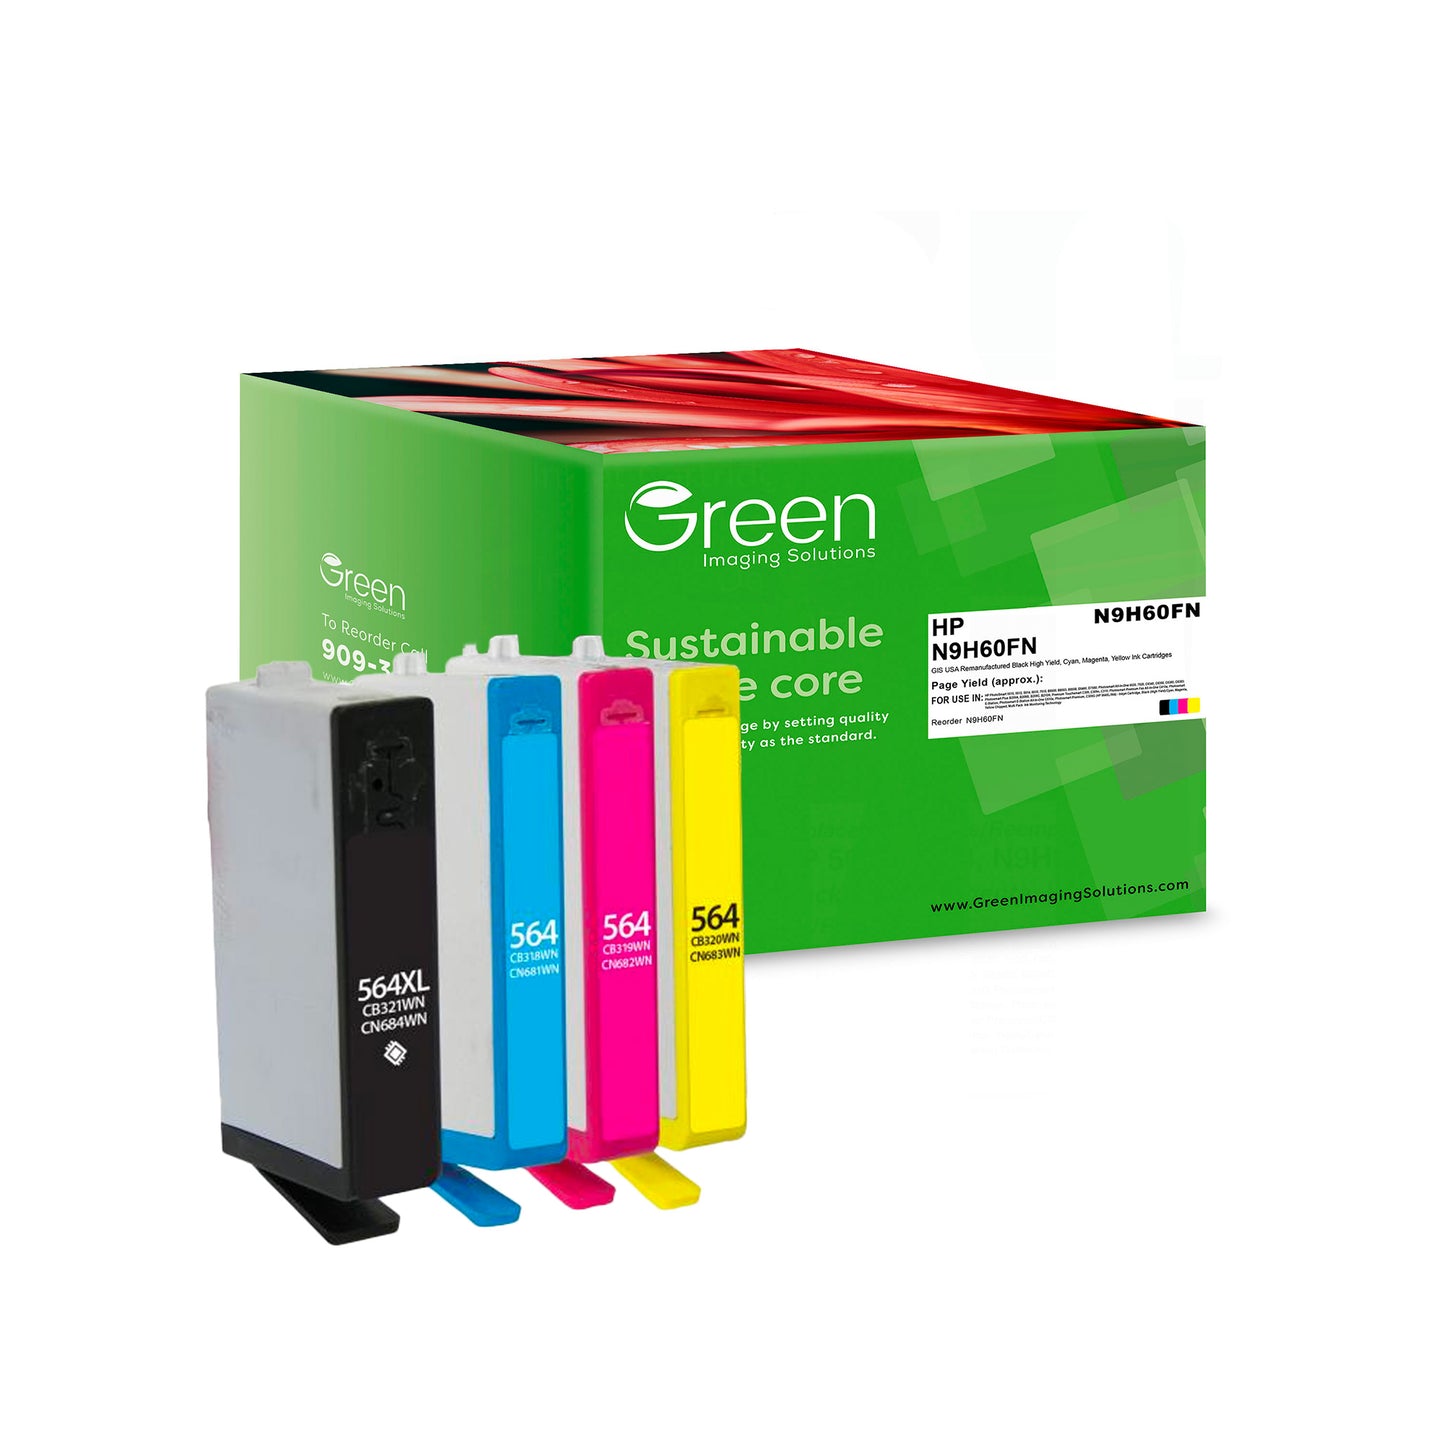 Green Imaging Solutions USA Remanufactured Black High Yield, Cyan, Magenta, Yellow Ink Cartridges for HP 564XL/564 (N9H60FN) 4-Pack